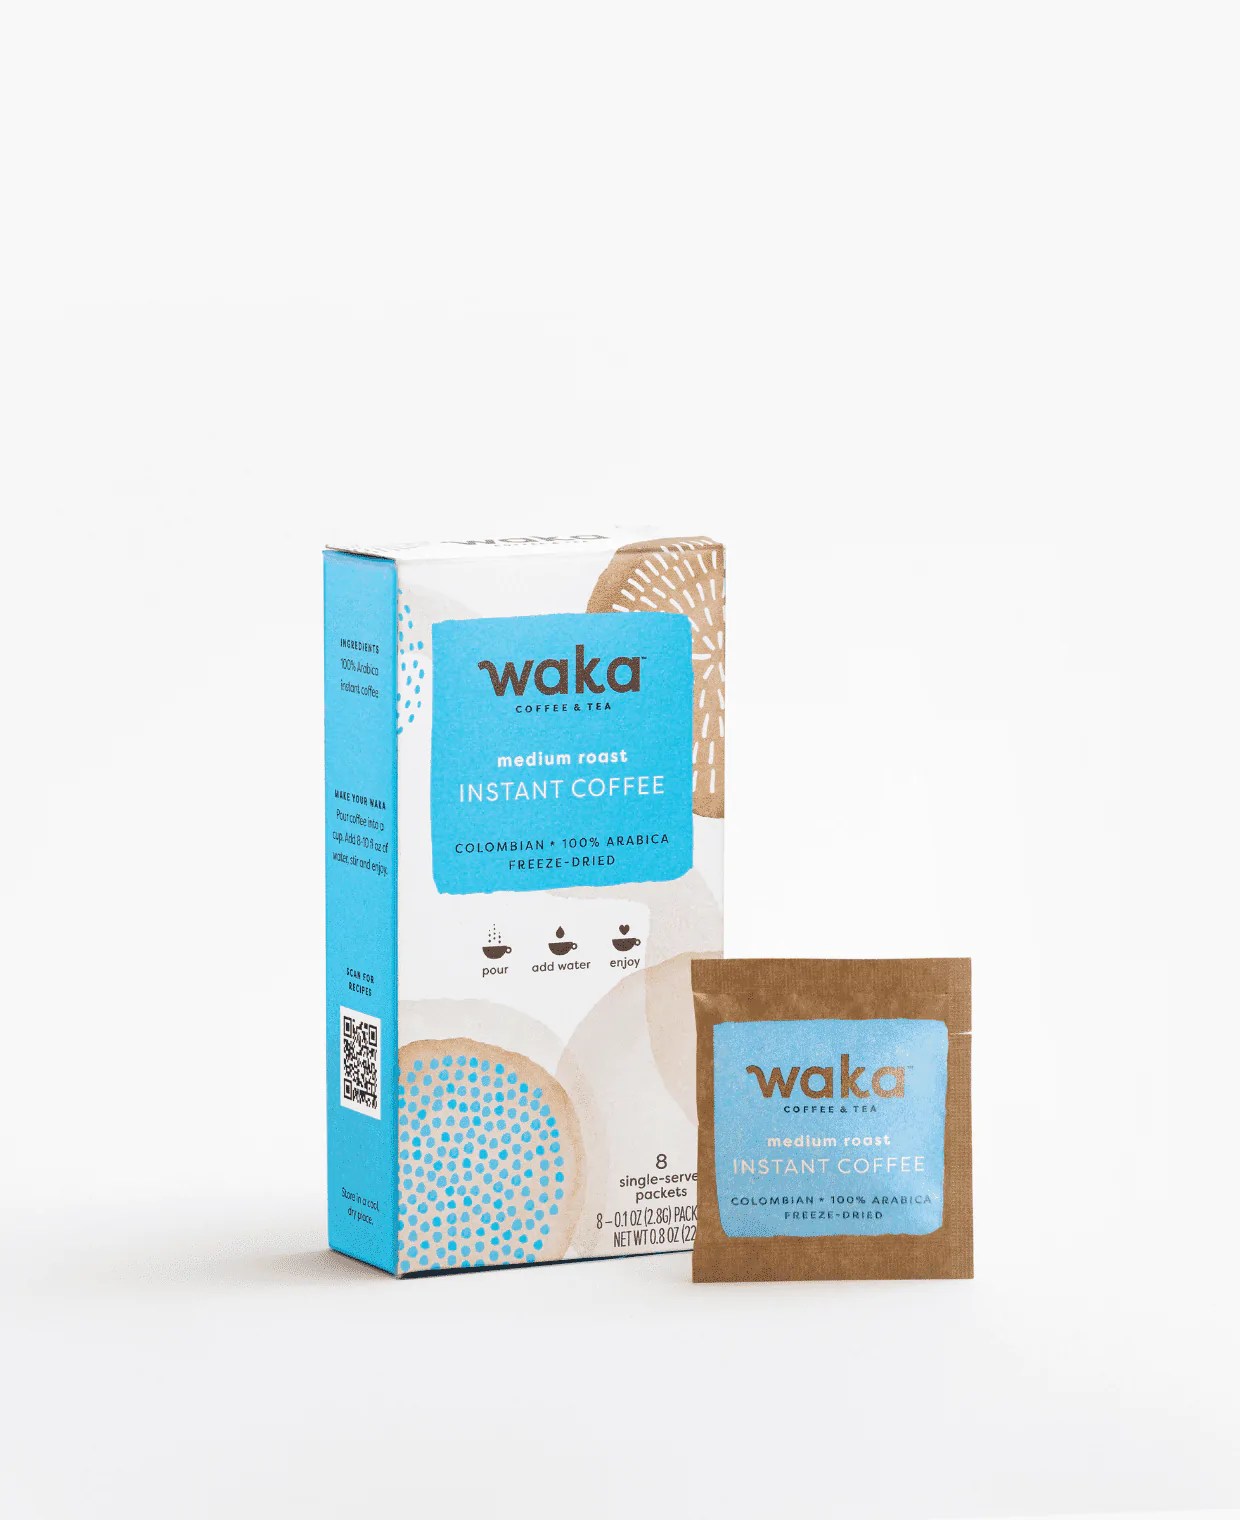 waka medium roast instant coffee box and pouches, one of the best instant coffees